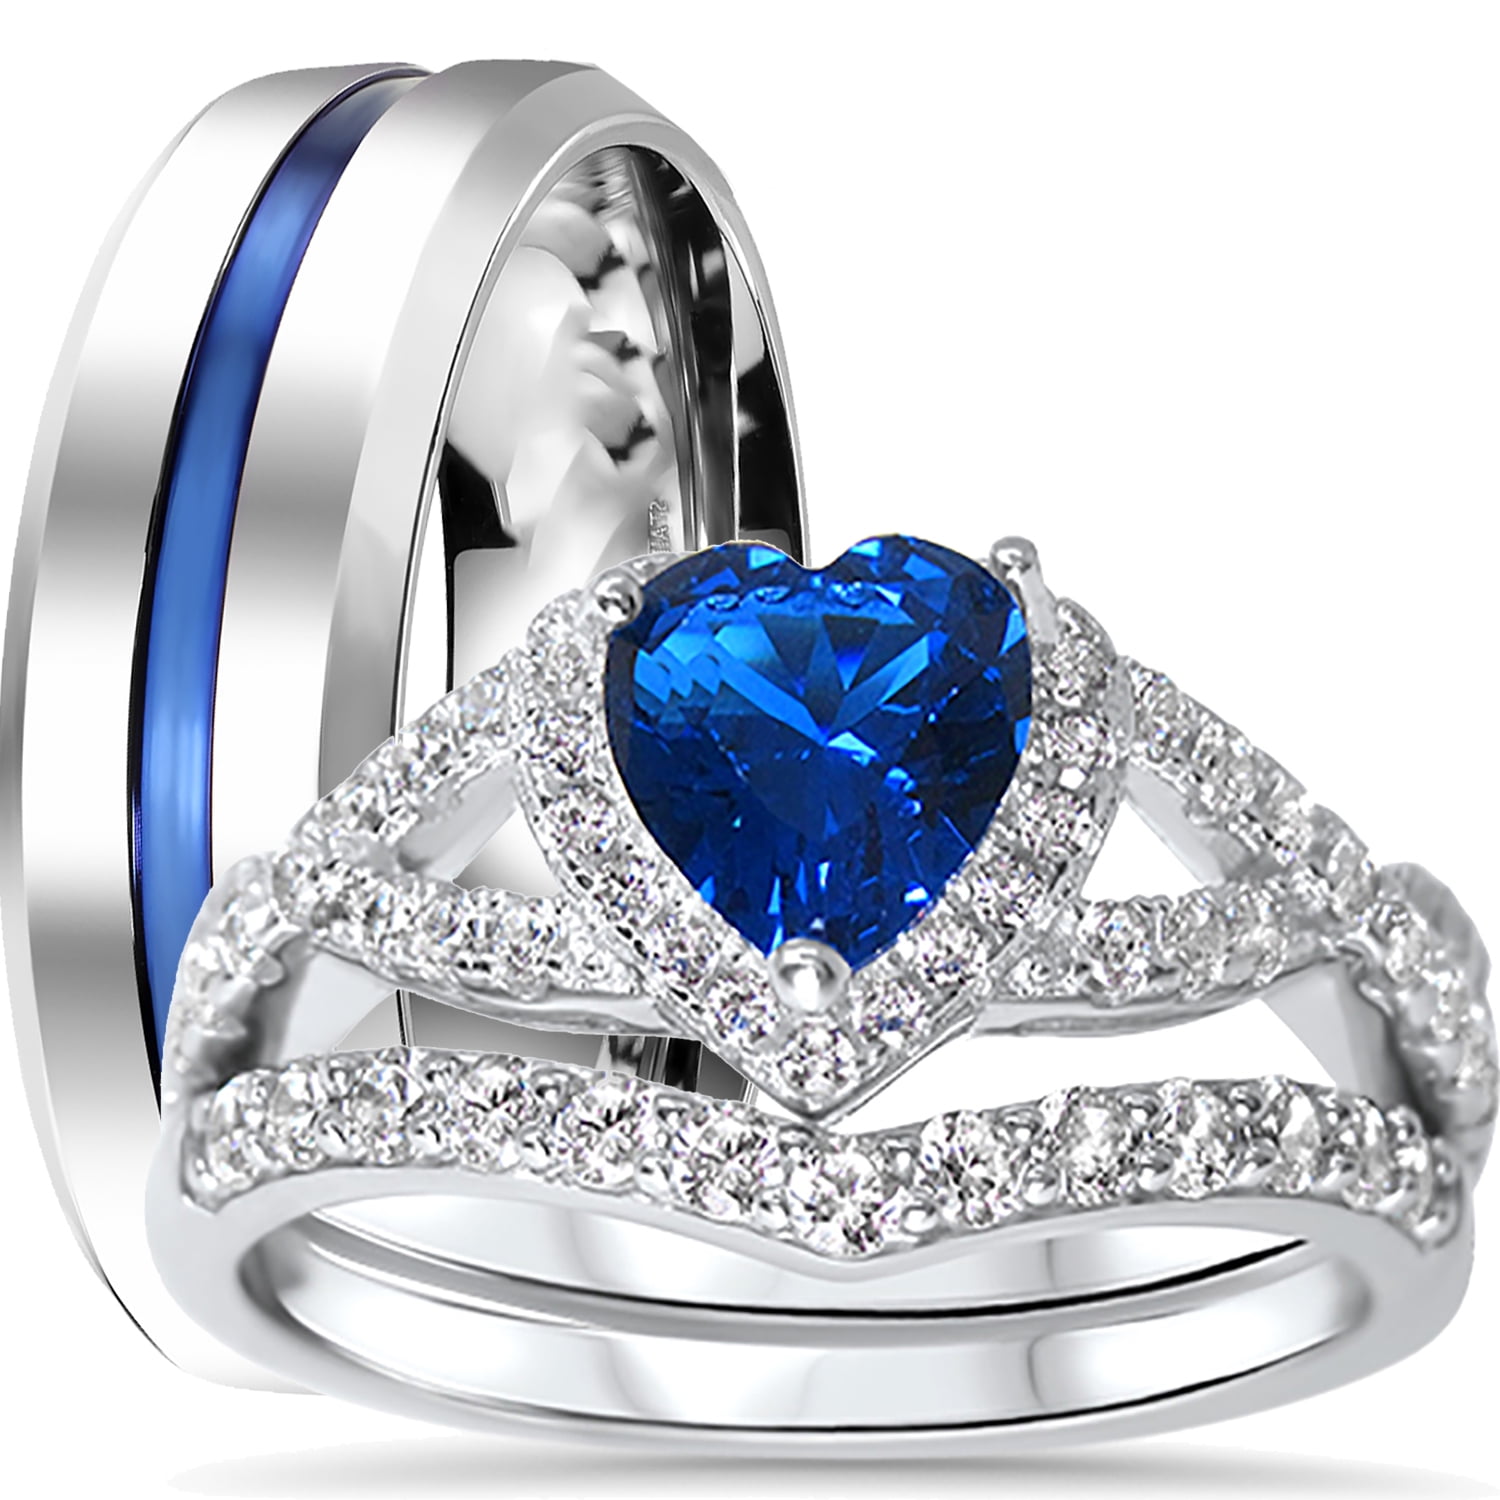 LaRaso & Co His Hers Sterling Blue Sapphire CZ Bridal Wedding Band ...